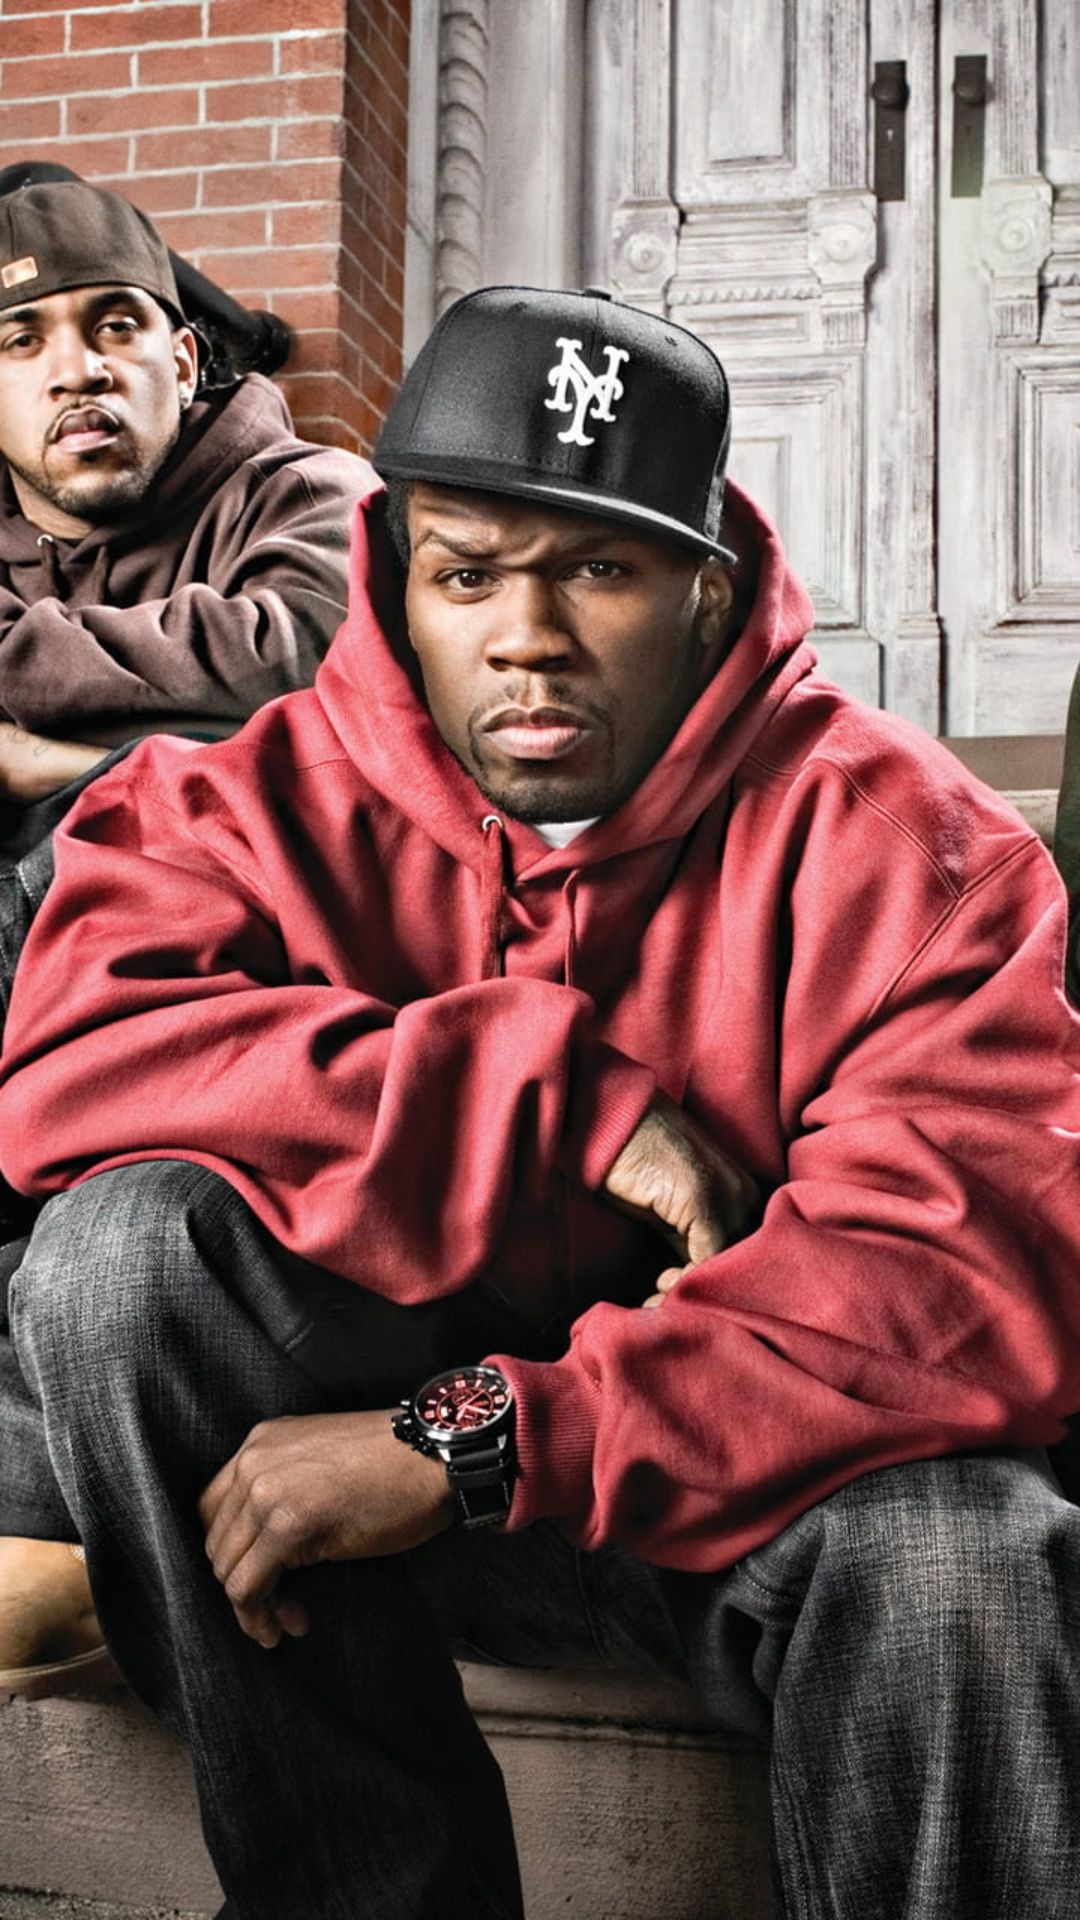 G-Unit wallpapers, Top 30 backgrounds, Download 4KHD, Iconic hip-hop group, 1080x1920 Full HD Phone